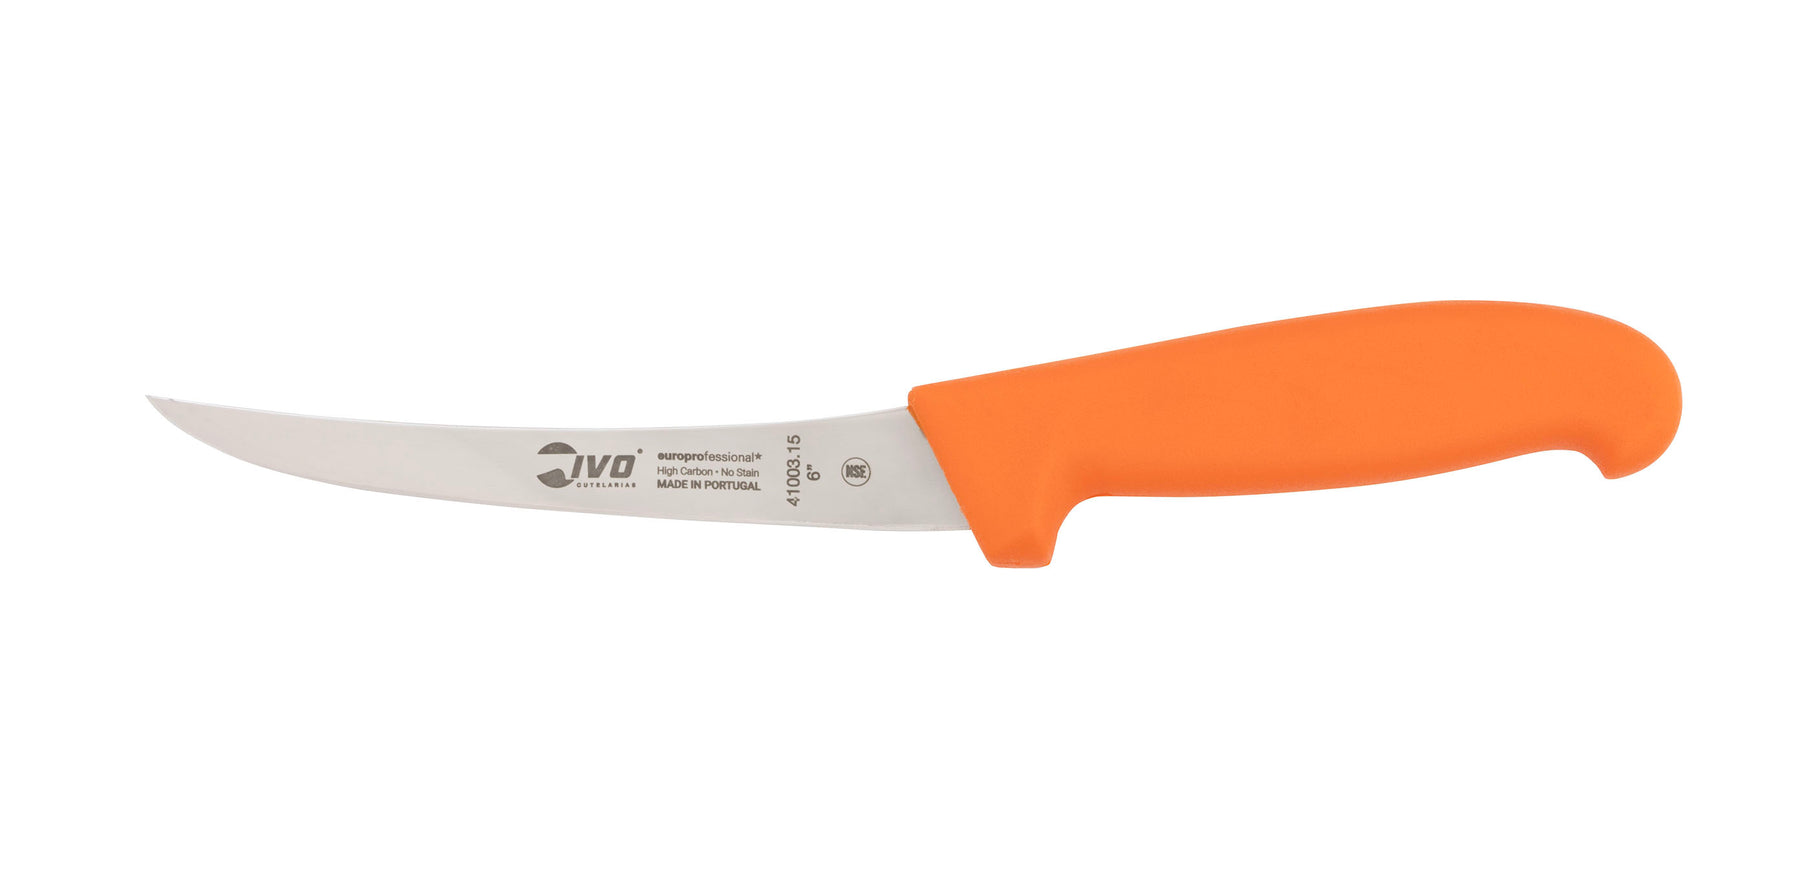 An orange in-stock poultry processing knife from Wolff Industries.